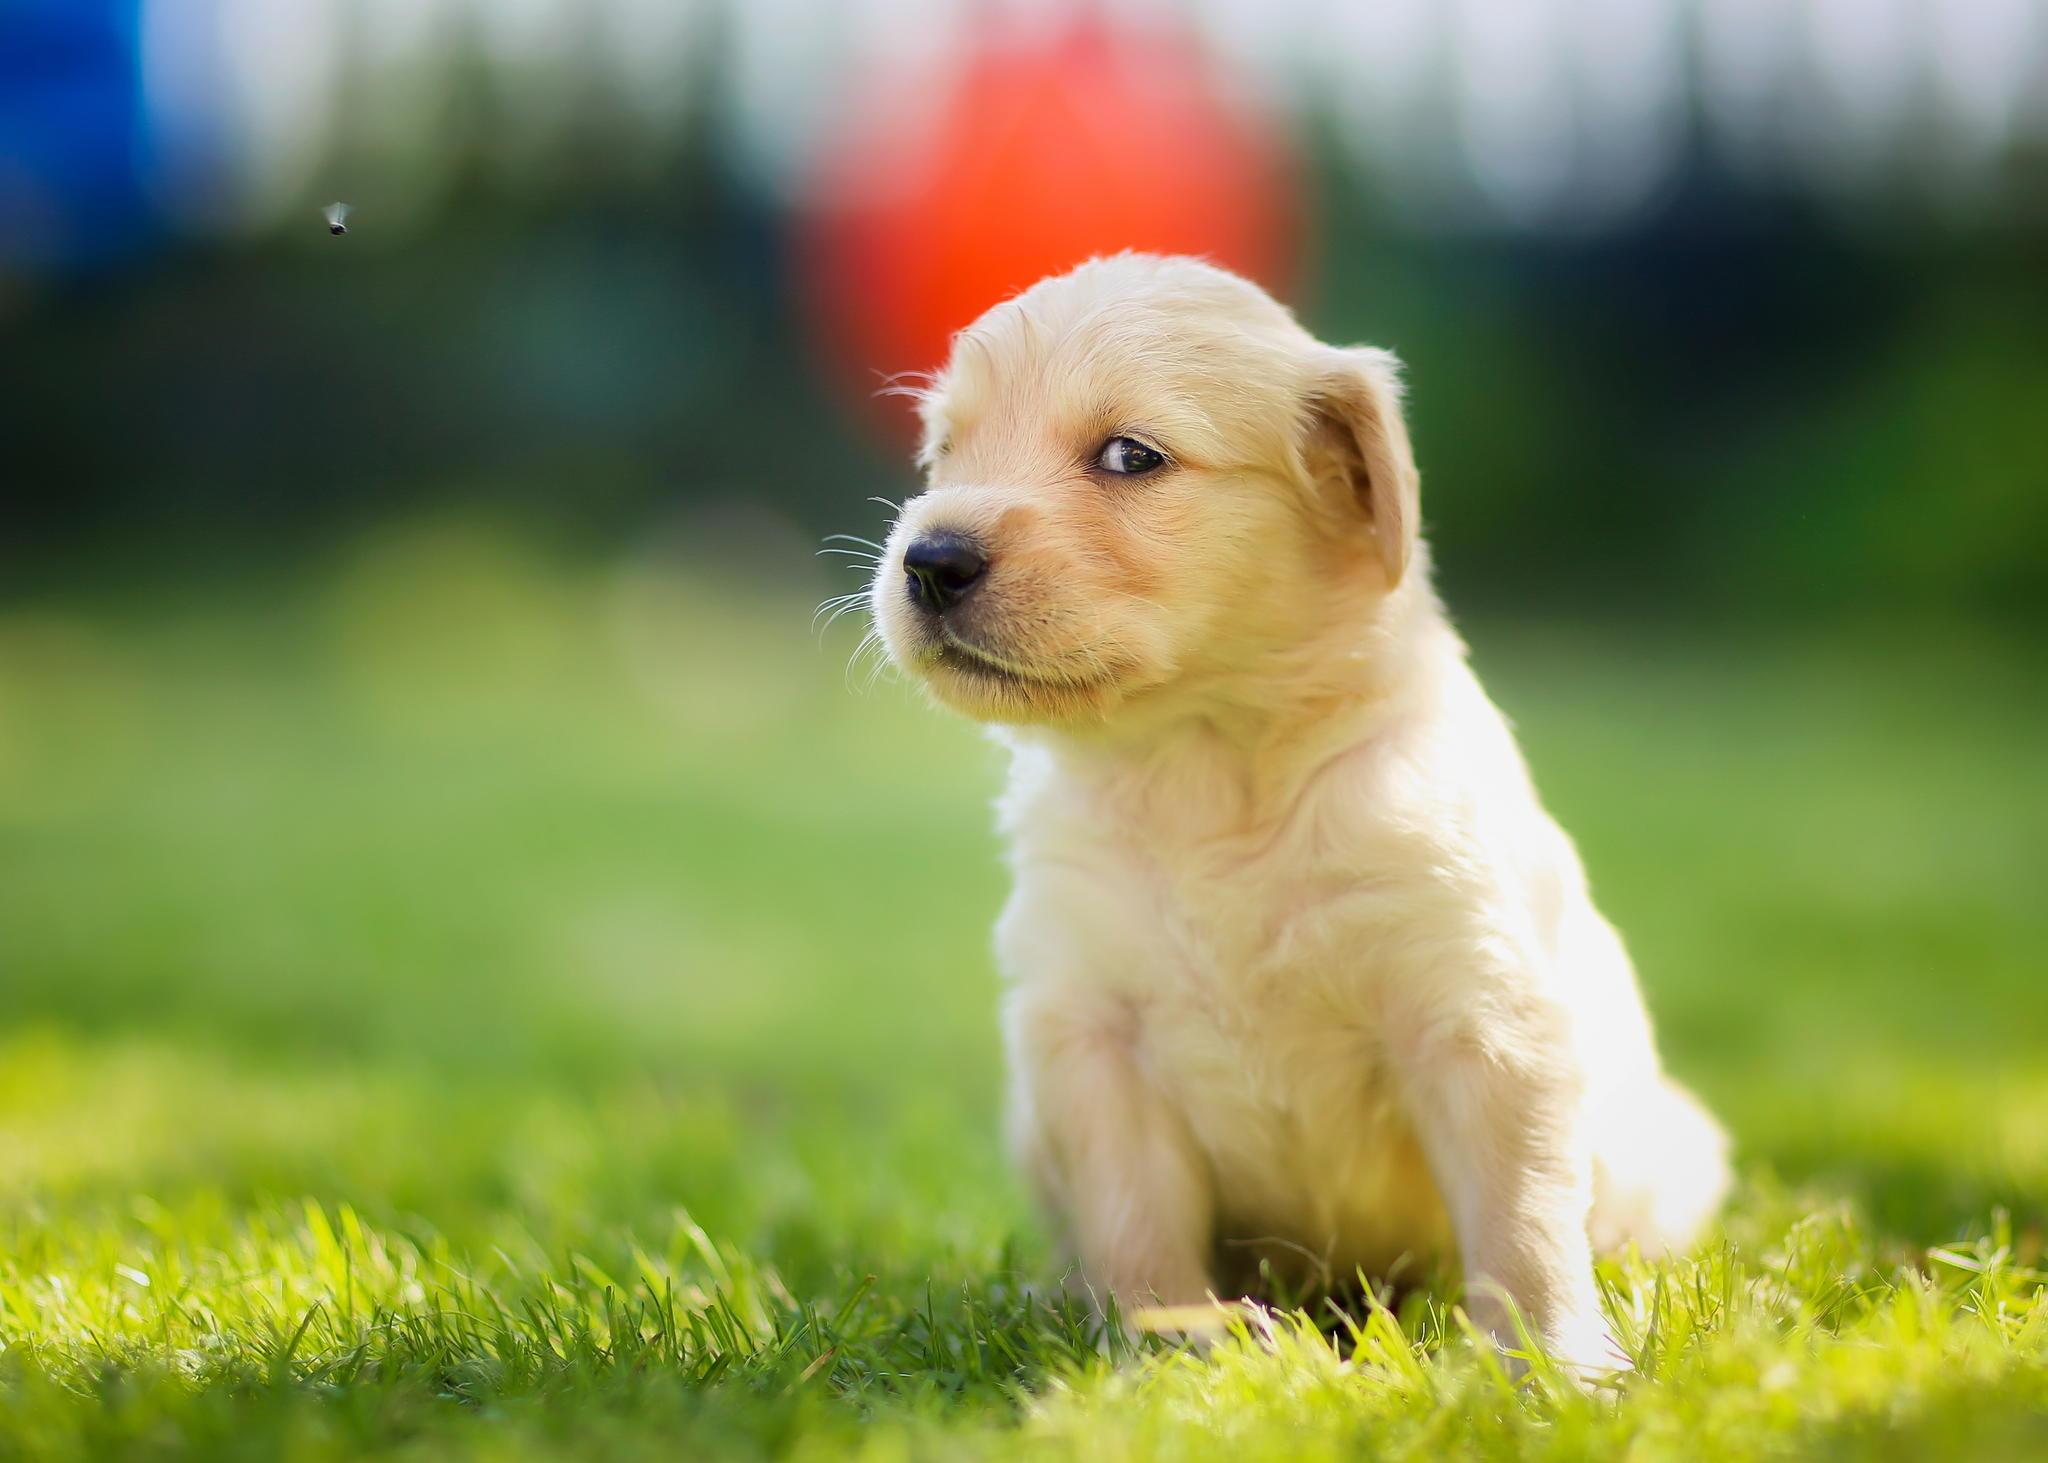 What should I do if my dog has blood in urine?